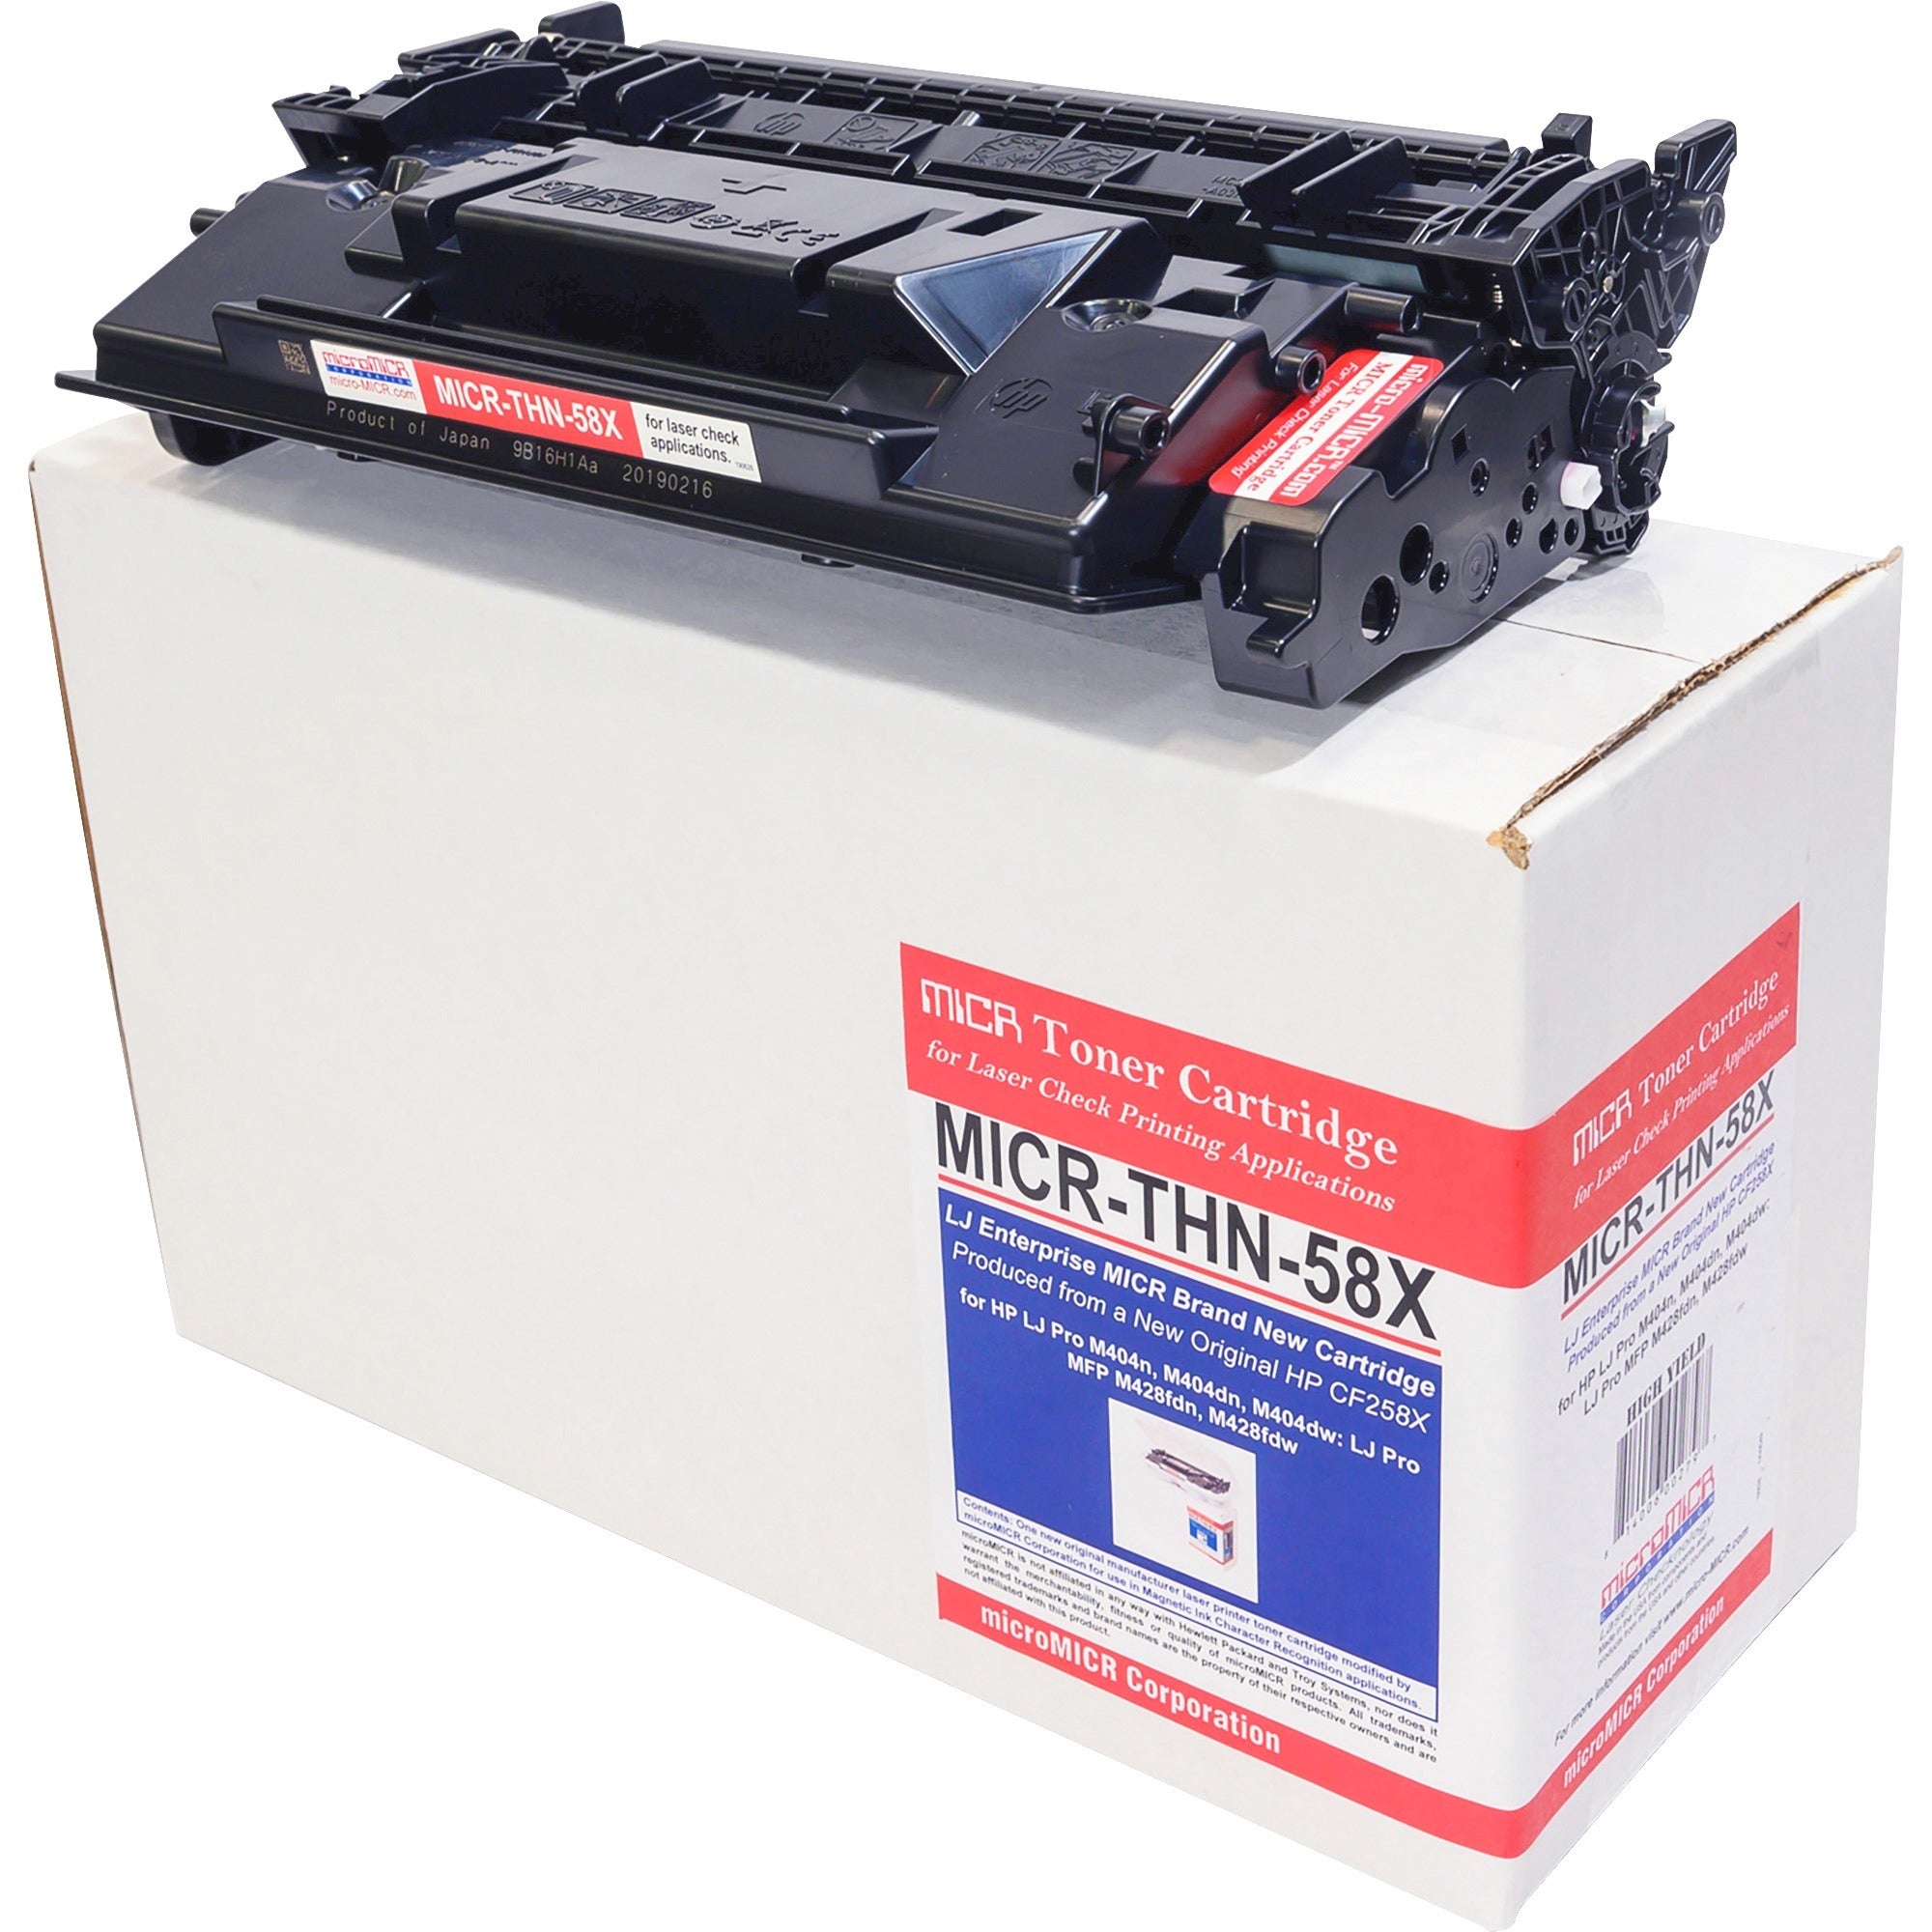 micromicr-micr-toner-cartridge-alternative-for-hp-58x-10000-pages_mcmmicrthn58x - 1